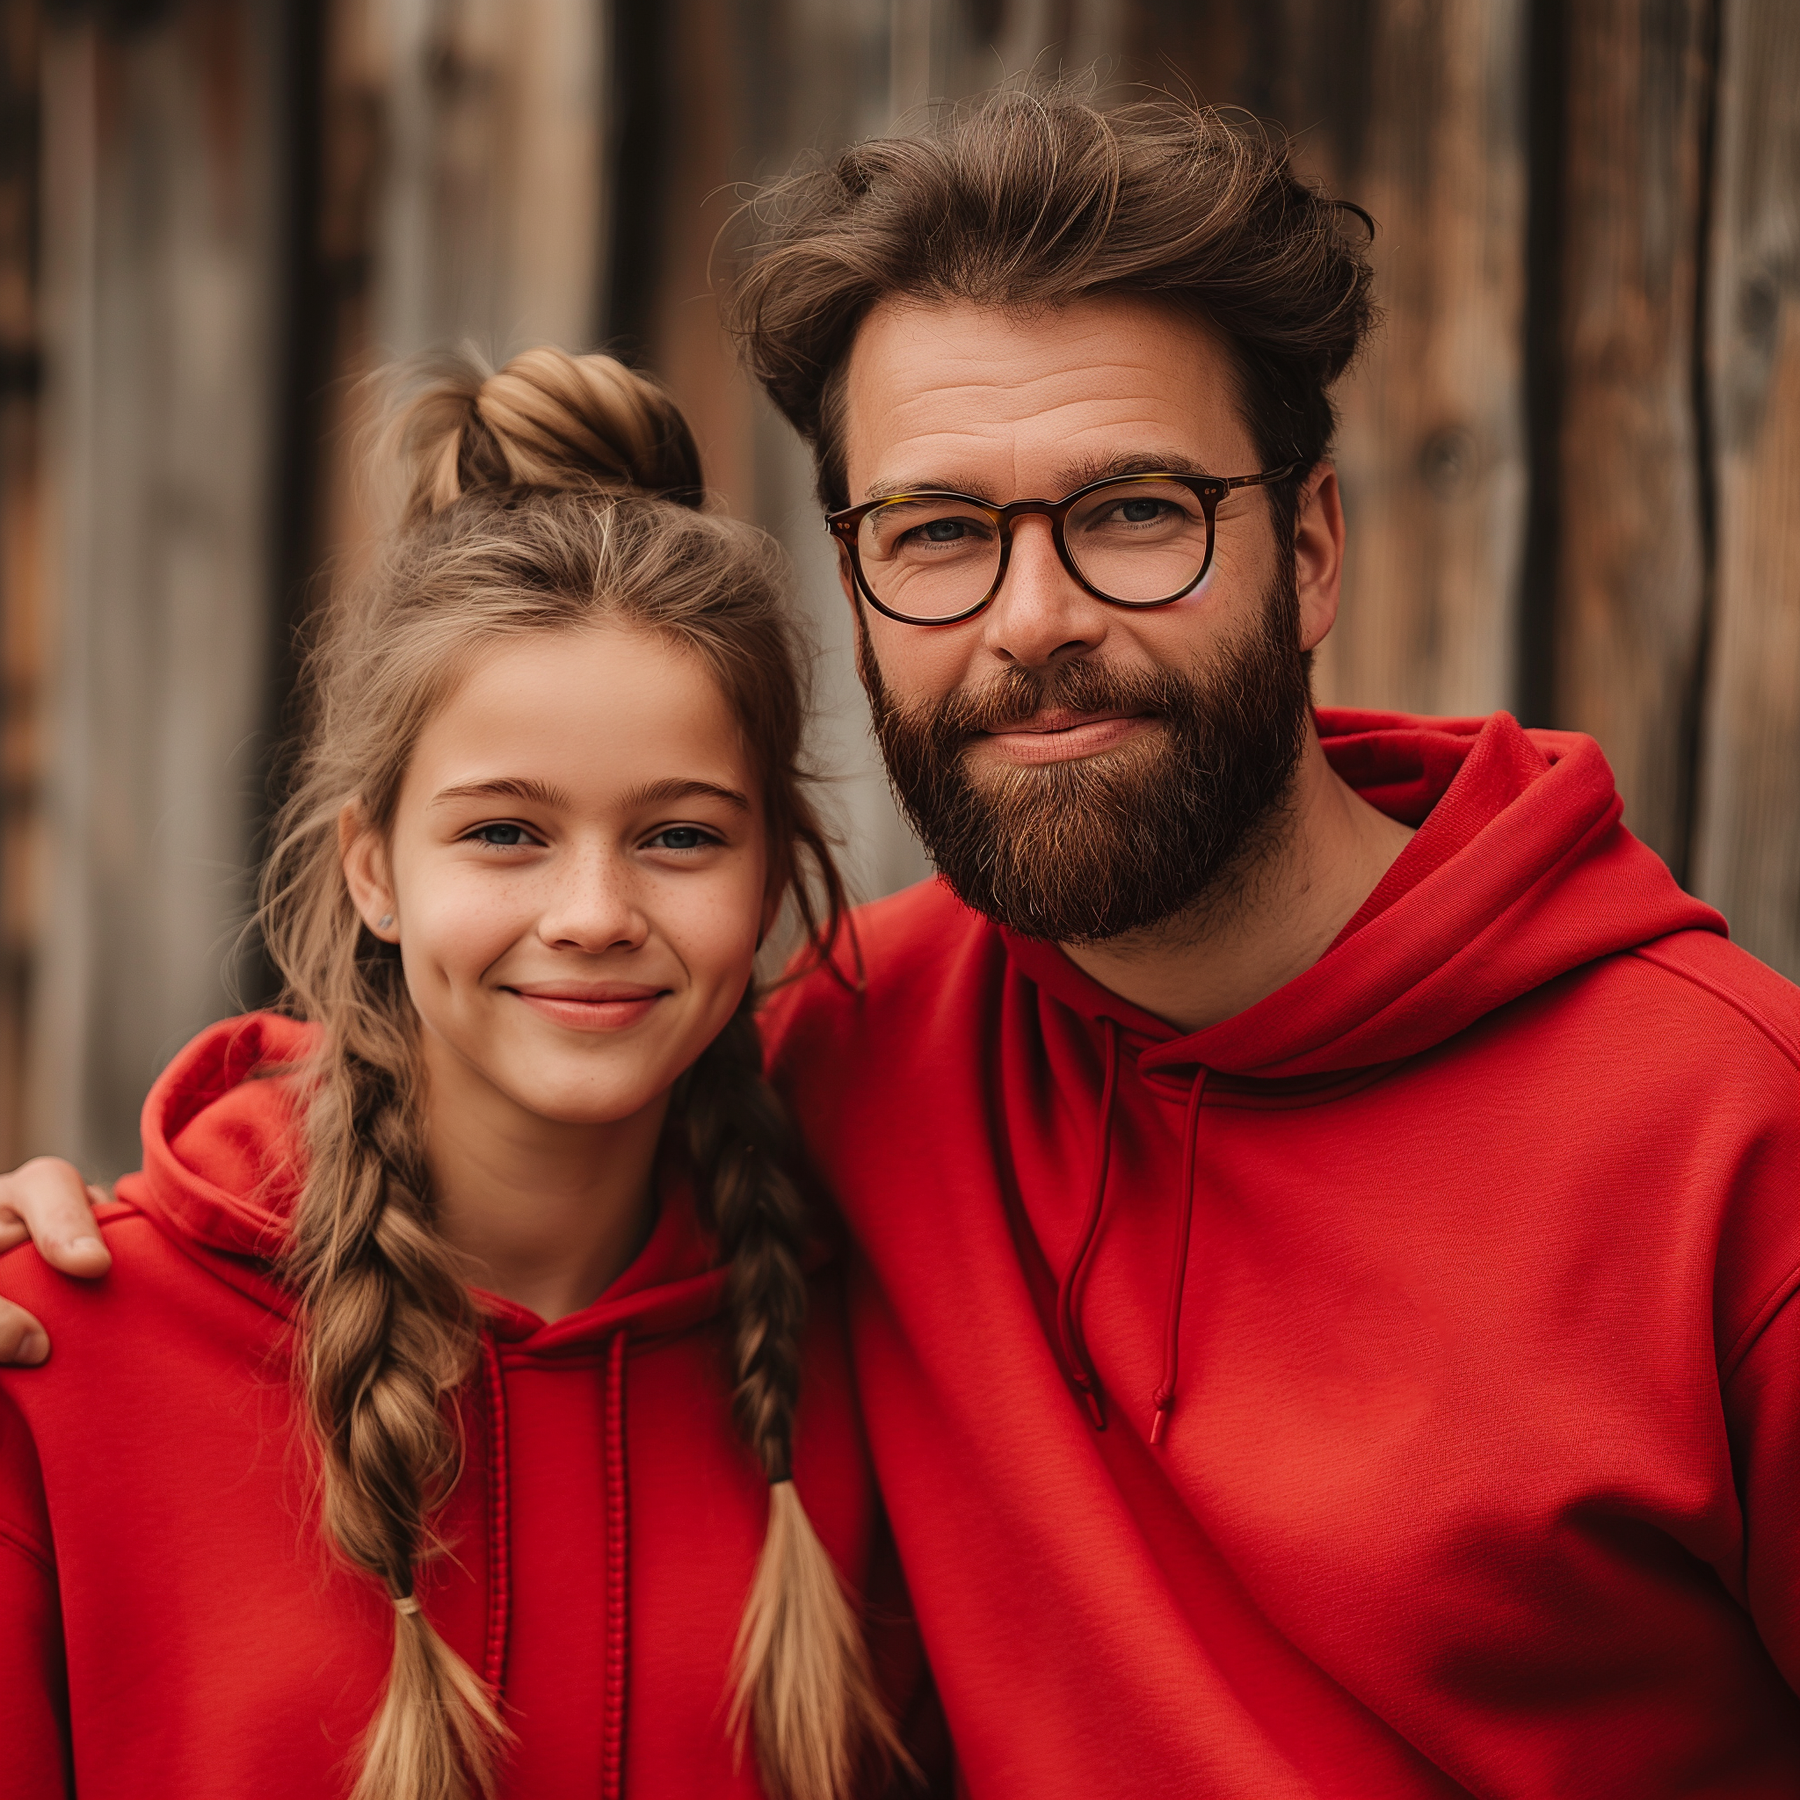 Daughter and dad wearing red hoodies